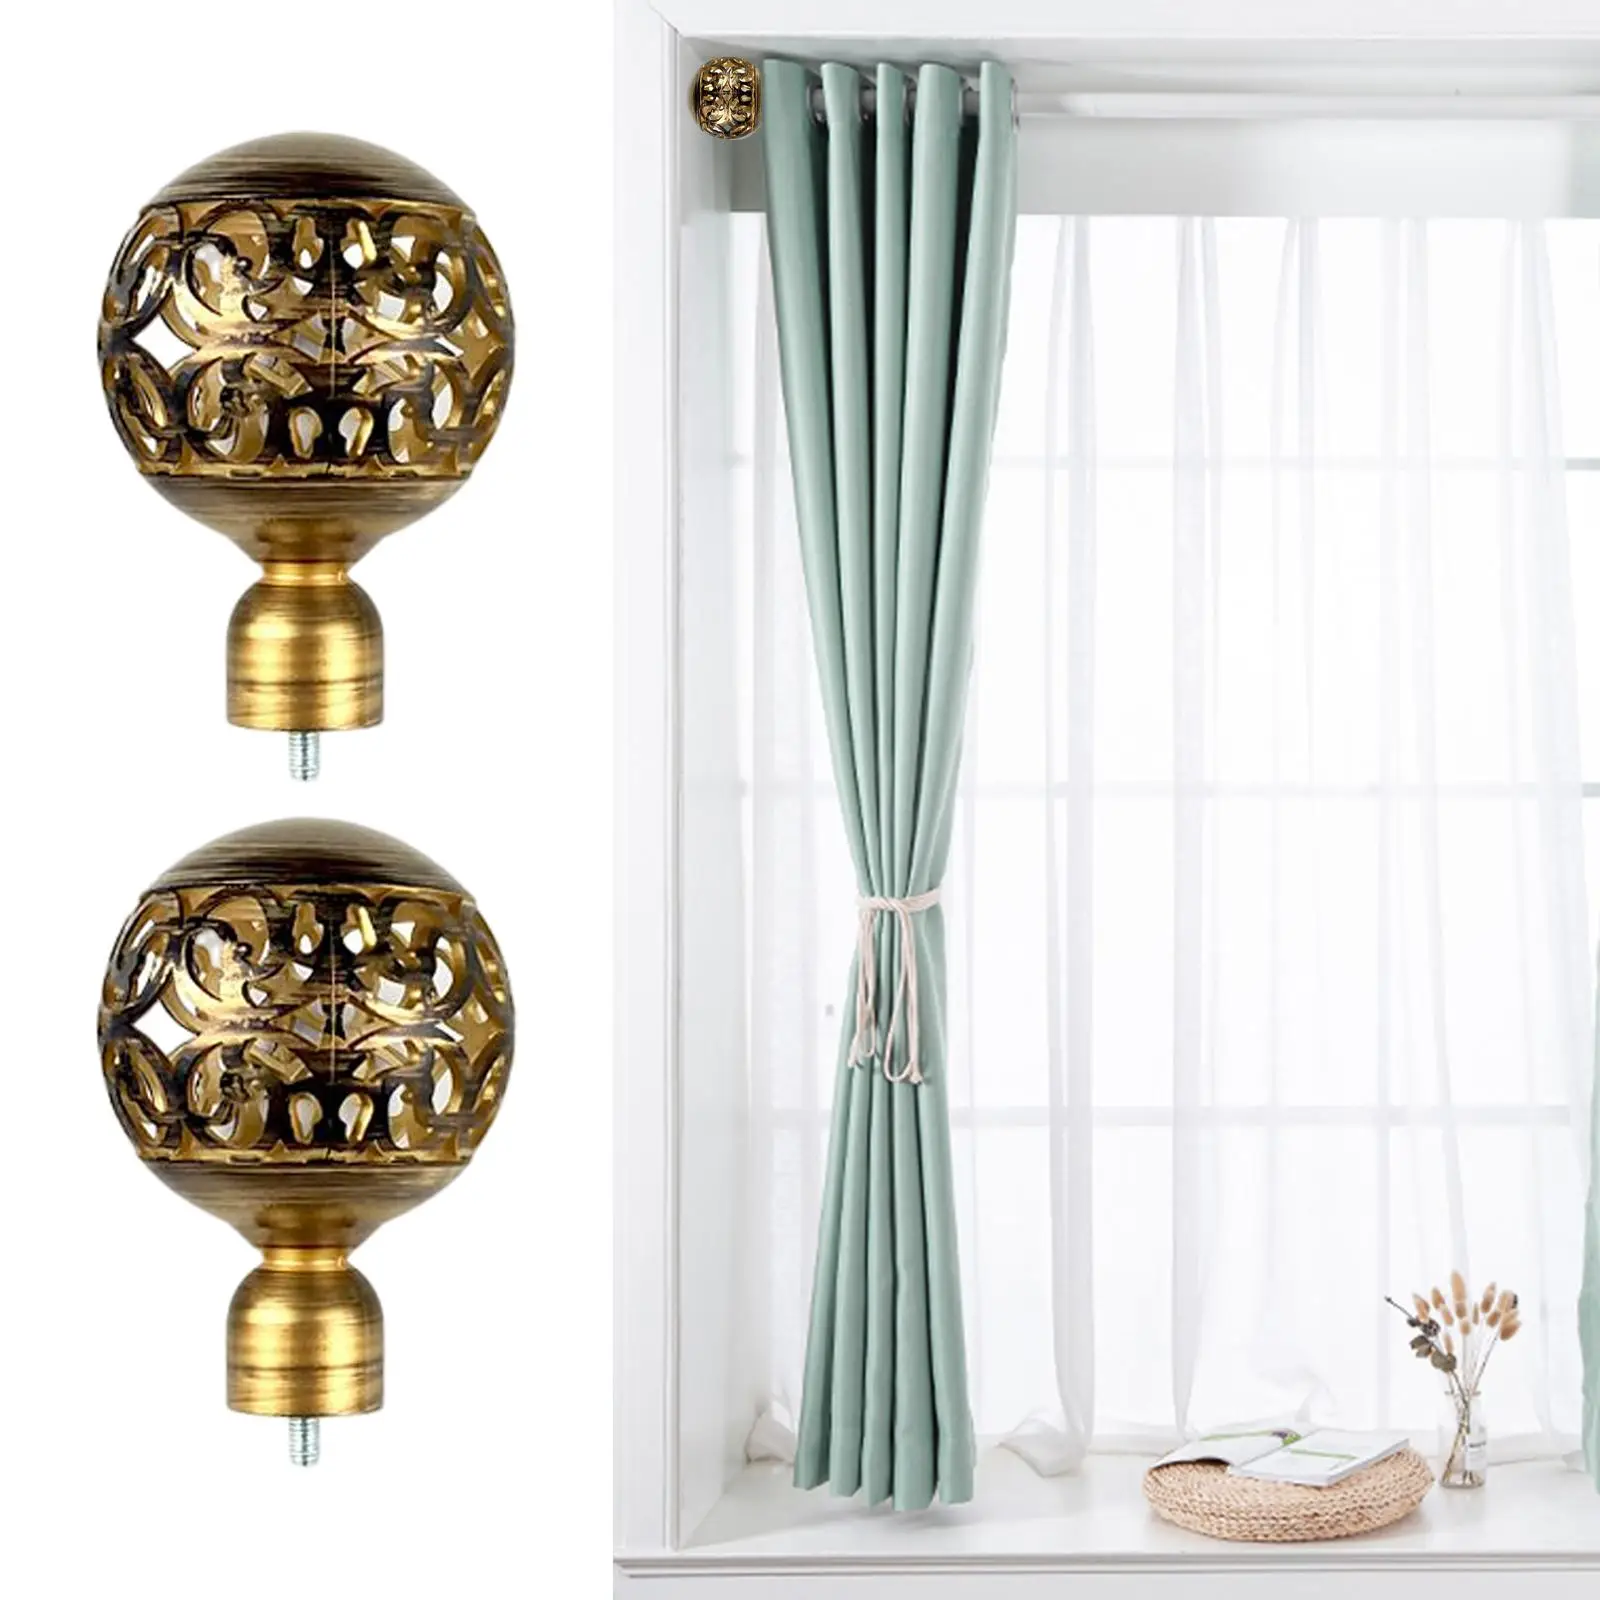 2x Hollow Curtain Rod Finials 3/4 inch Vintage Accessories Decoration Hardware Drapery Rod Finials for Office Home Bathroom